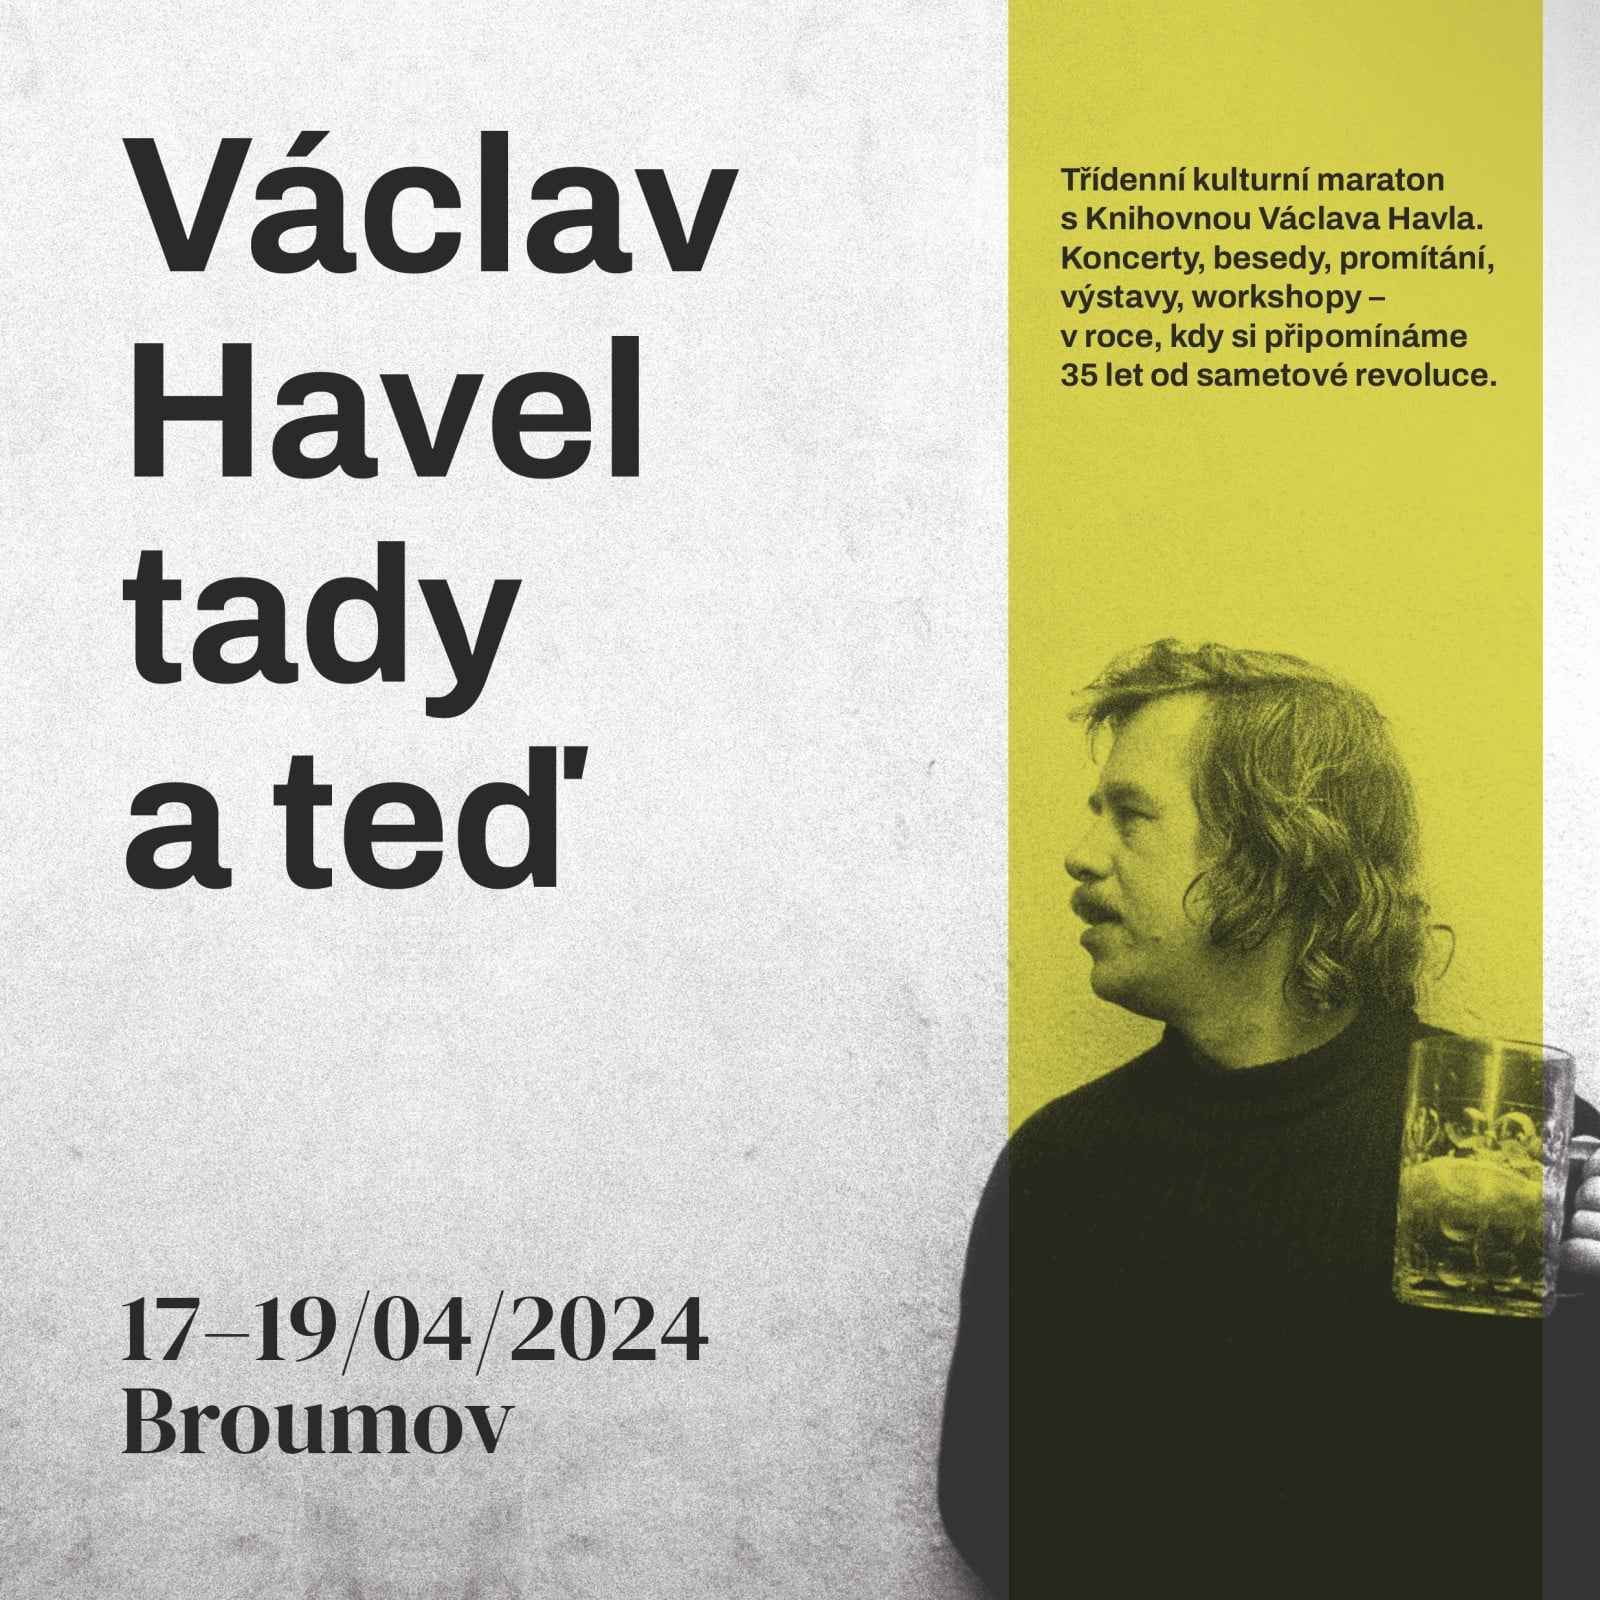 Václav Havel, Here and Now in Broumov